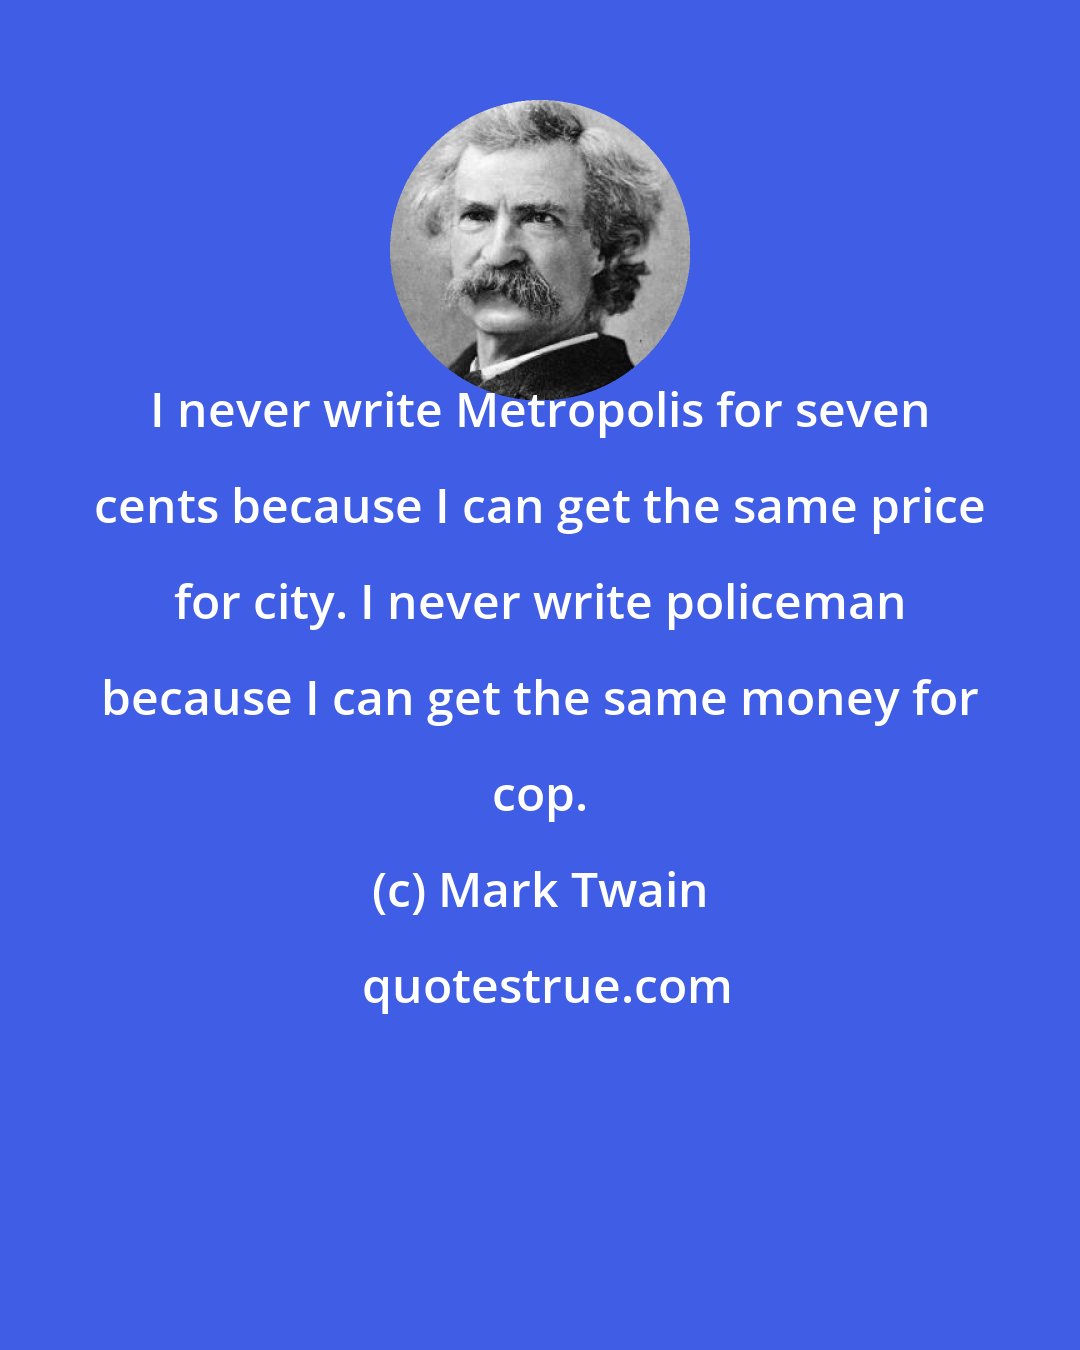 Mark Twain: I never write Metropolis for seven cents because I can get the same price for city. I never write policeman because I can get the same money for cop.